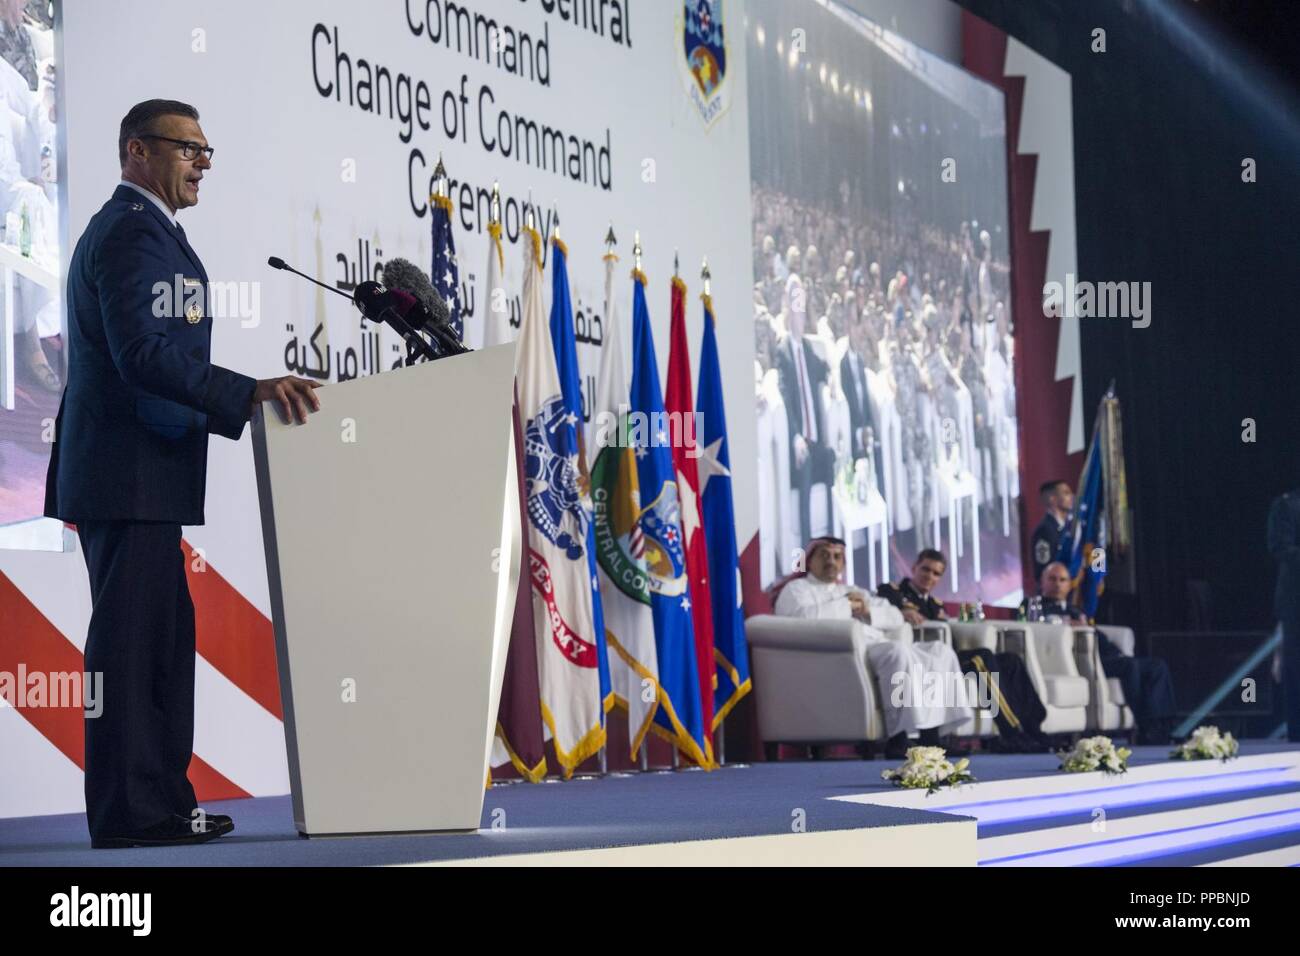 Lt. Gen. Joseph T. Guastella Jr., Commander of U.S. Air Forces Central Command (AFCENT), speaks to attendees during the AFCENT change of command ceremony at Al Udeid Air Base, Qatar, Aug. 30.  Guastella entered the Air Force in 1987 as a graduate of the U.S. Air Force Academy.  He’s flown the F-16 Fighting Falcon and A-10 Thunderbolt II, served multiple combat tours and instructed at the U.S. Air Force Fighter Weapons School.  He is a command pilot and has accumulated more than 4,000 flying hours, including 1,000 combat hours in the F-16C/D and the A-10C. Stock Photo